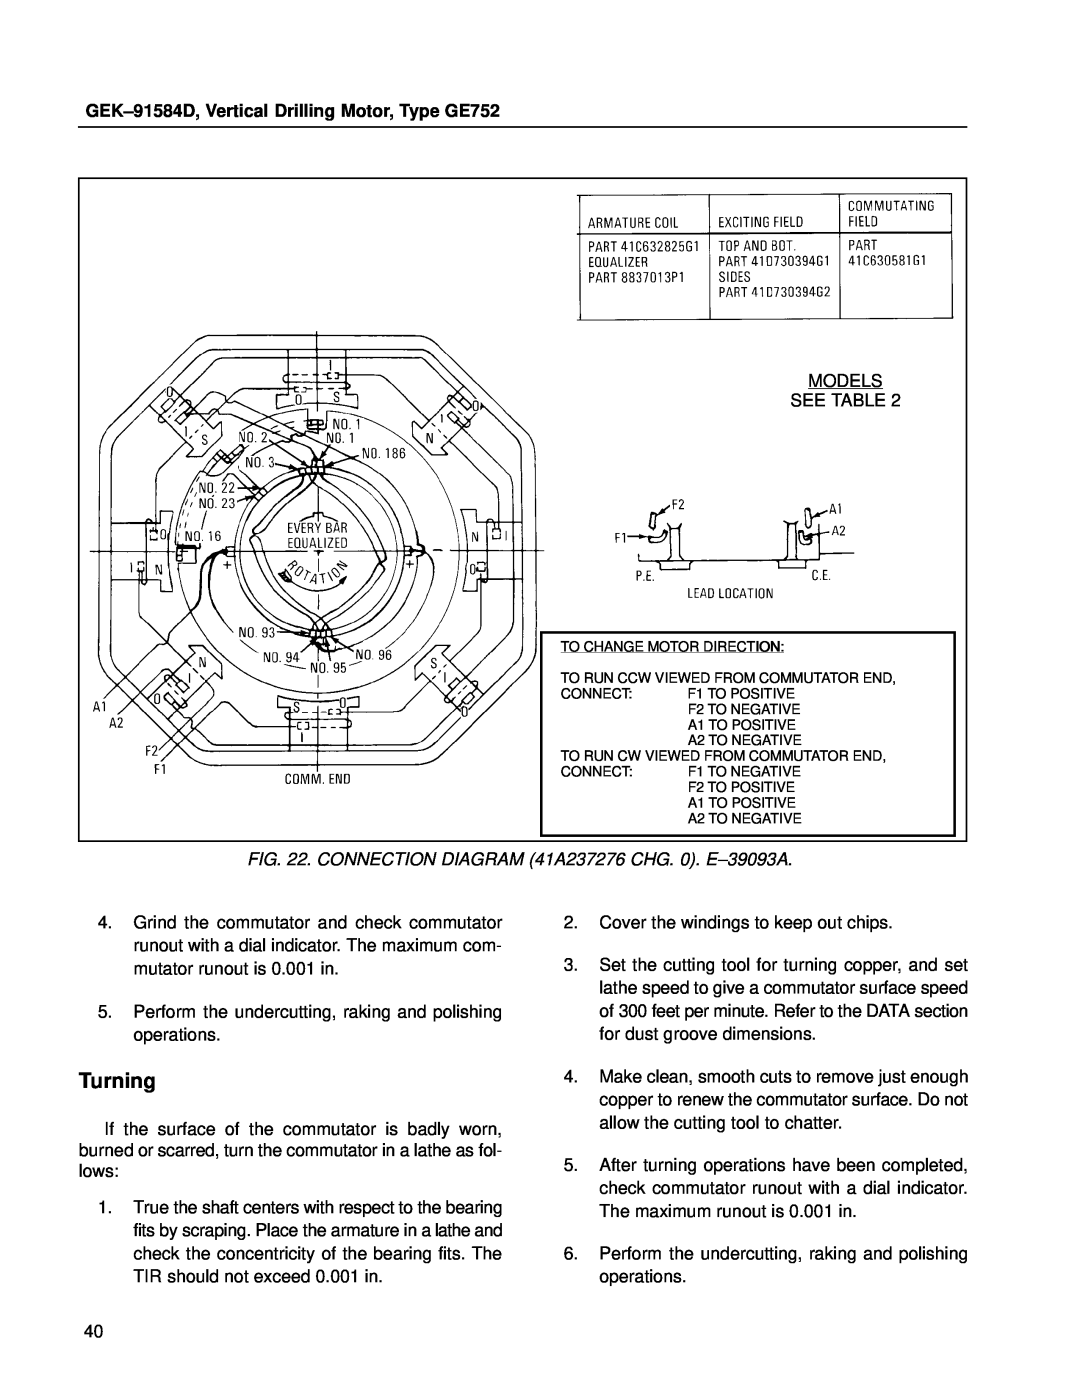 GE manual Turning, CONNECTION DIAGRAM 41A237276 CHG. 0. E±39093A, GEK±91584D, Vertical Drilling Motor, Type GE752 